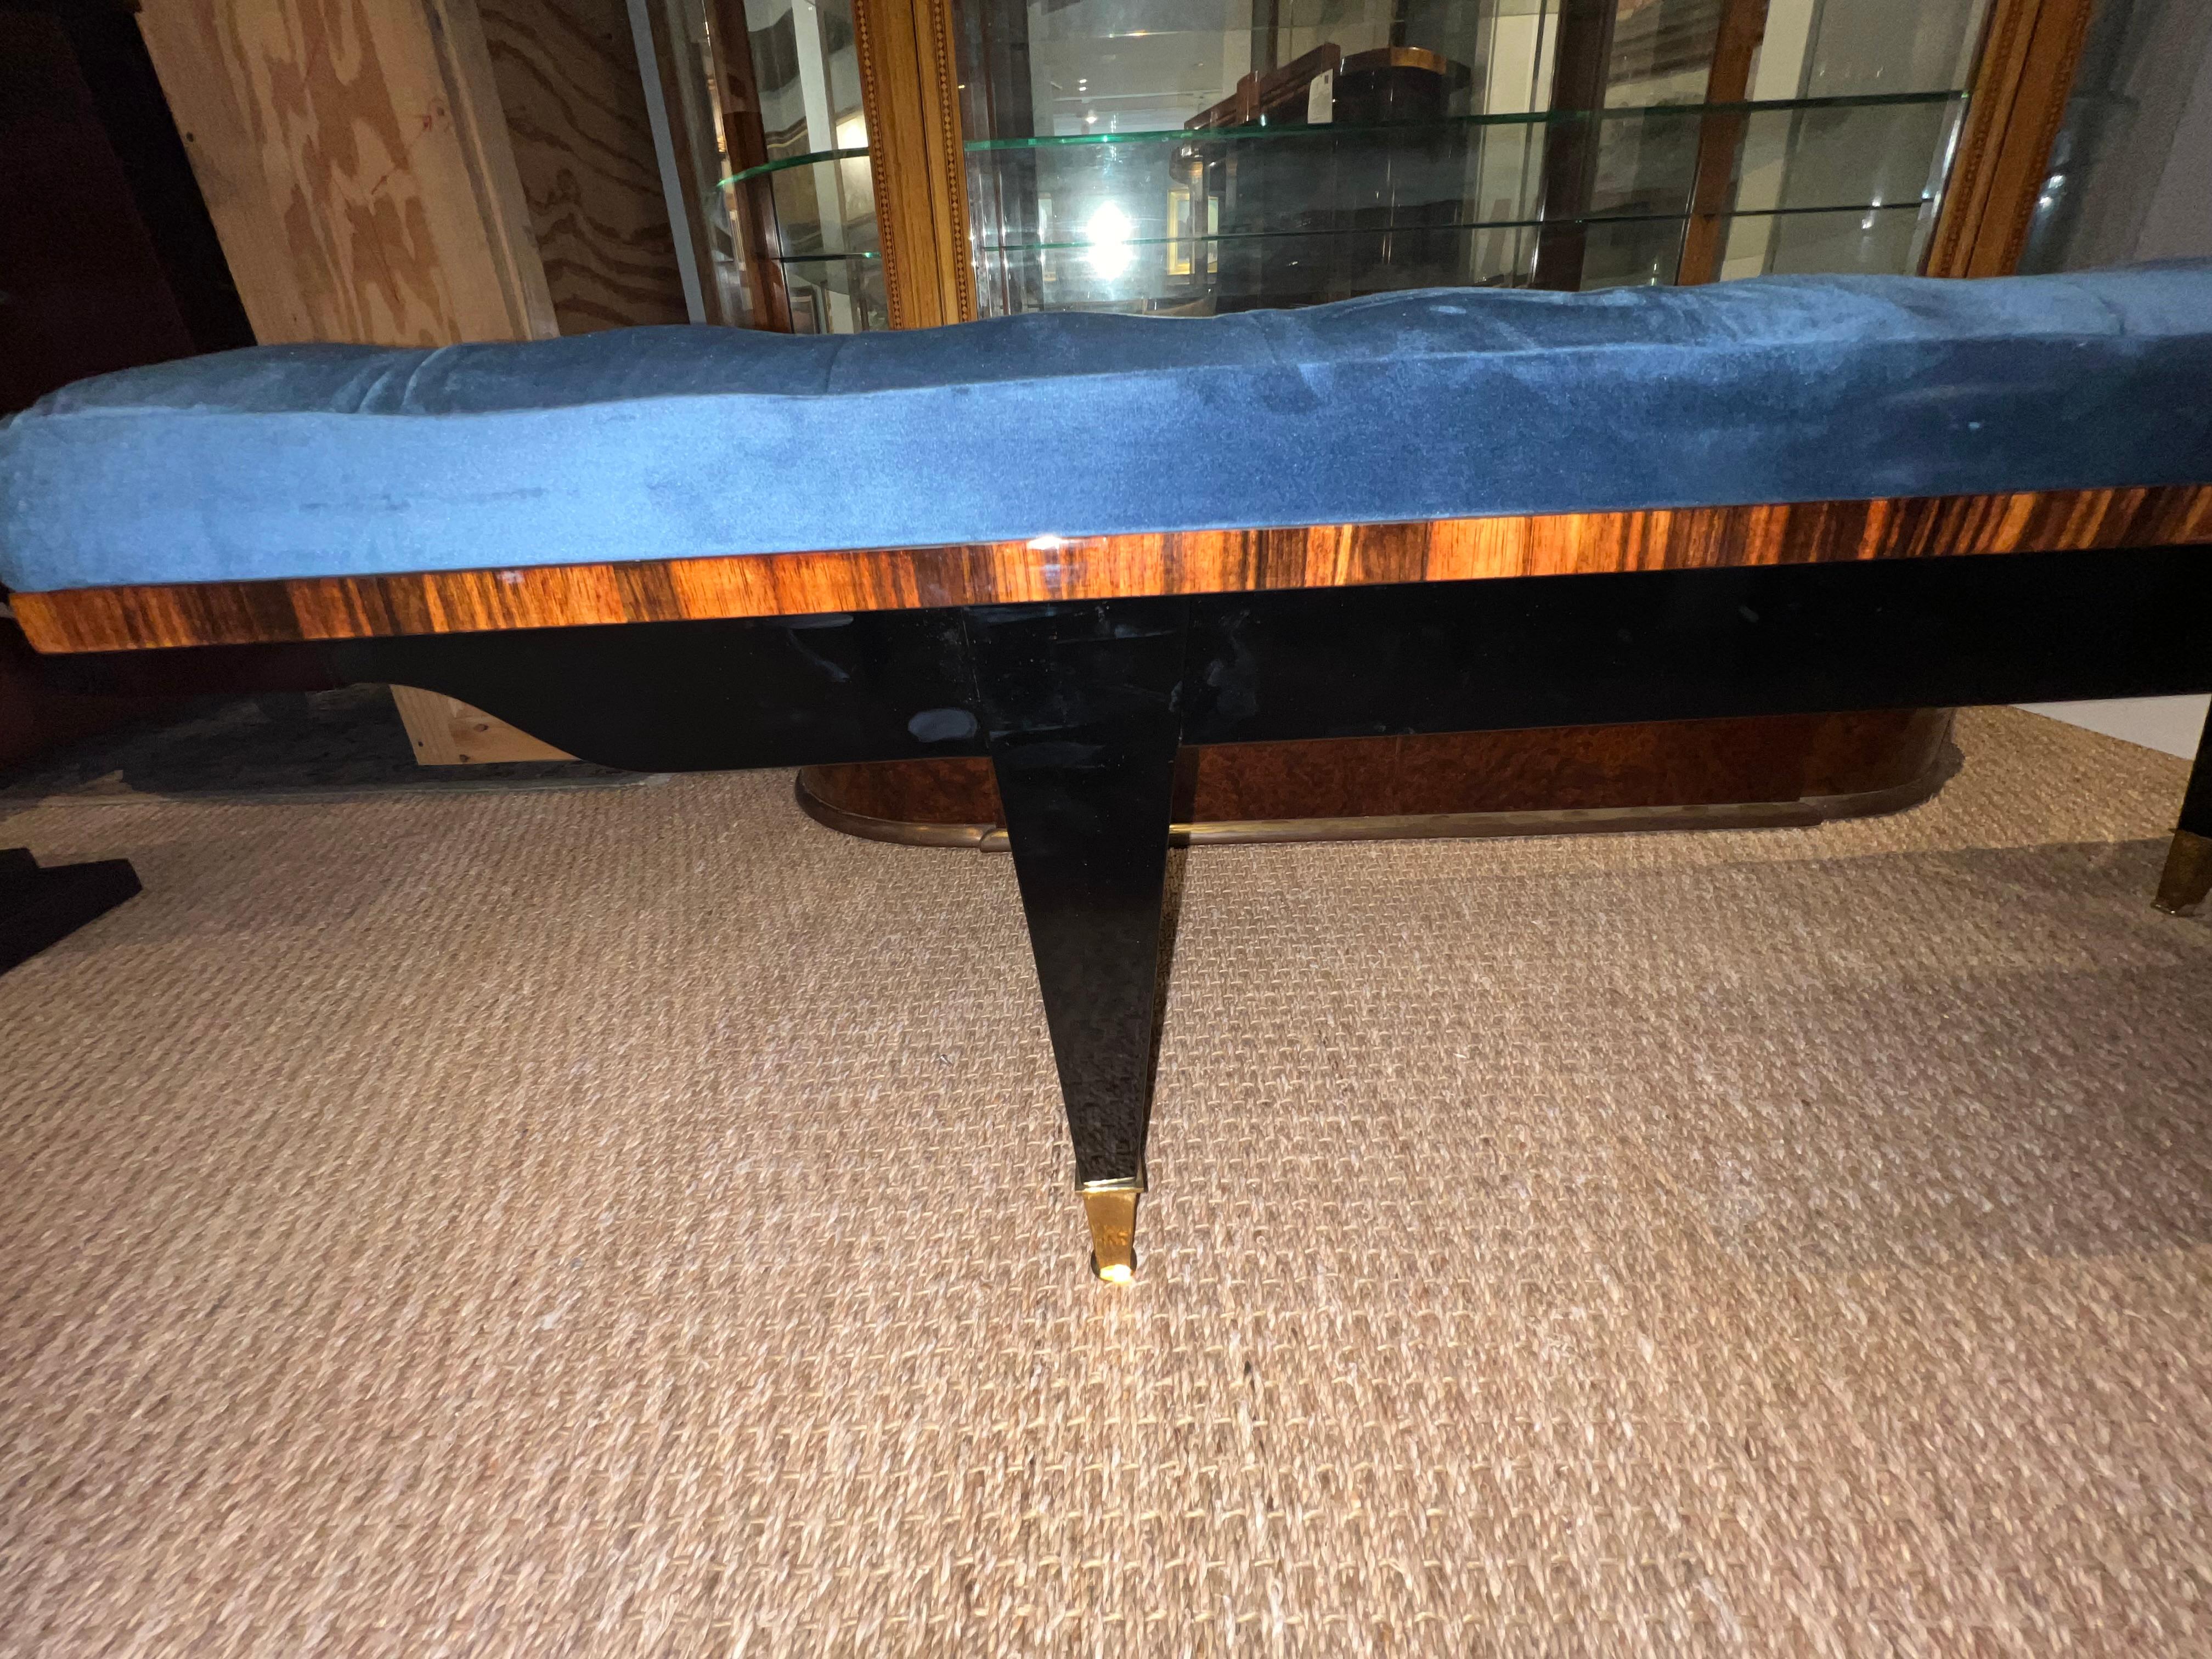 Art Deco French bench is made out of Macassar wood and newly re-upholstered with blue velvety fabric. Bench seat  is elevated by  four elongated legs made out of ebonized wood with a brass decorative tips.
Condition is perfect. Restored 

French,